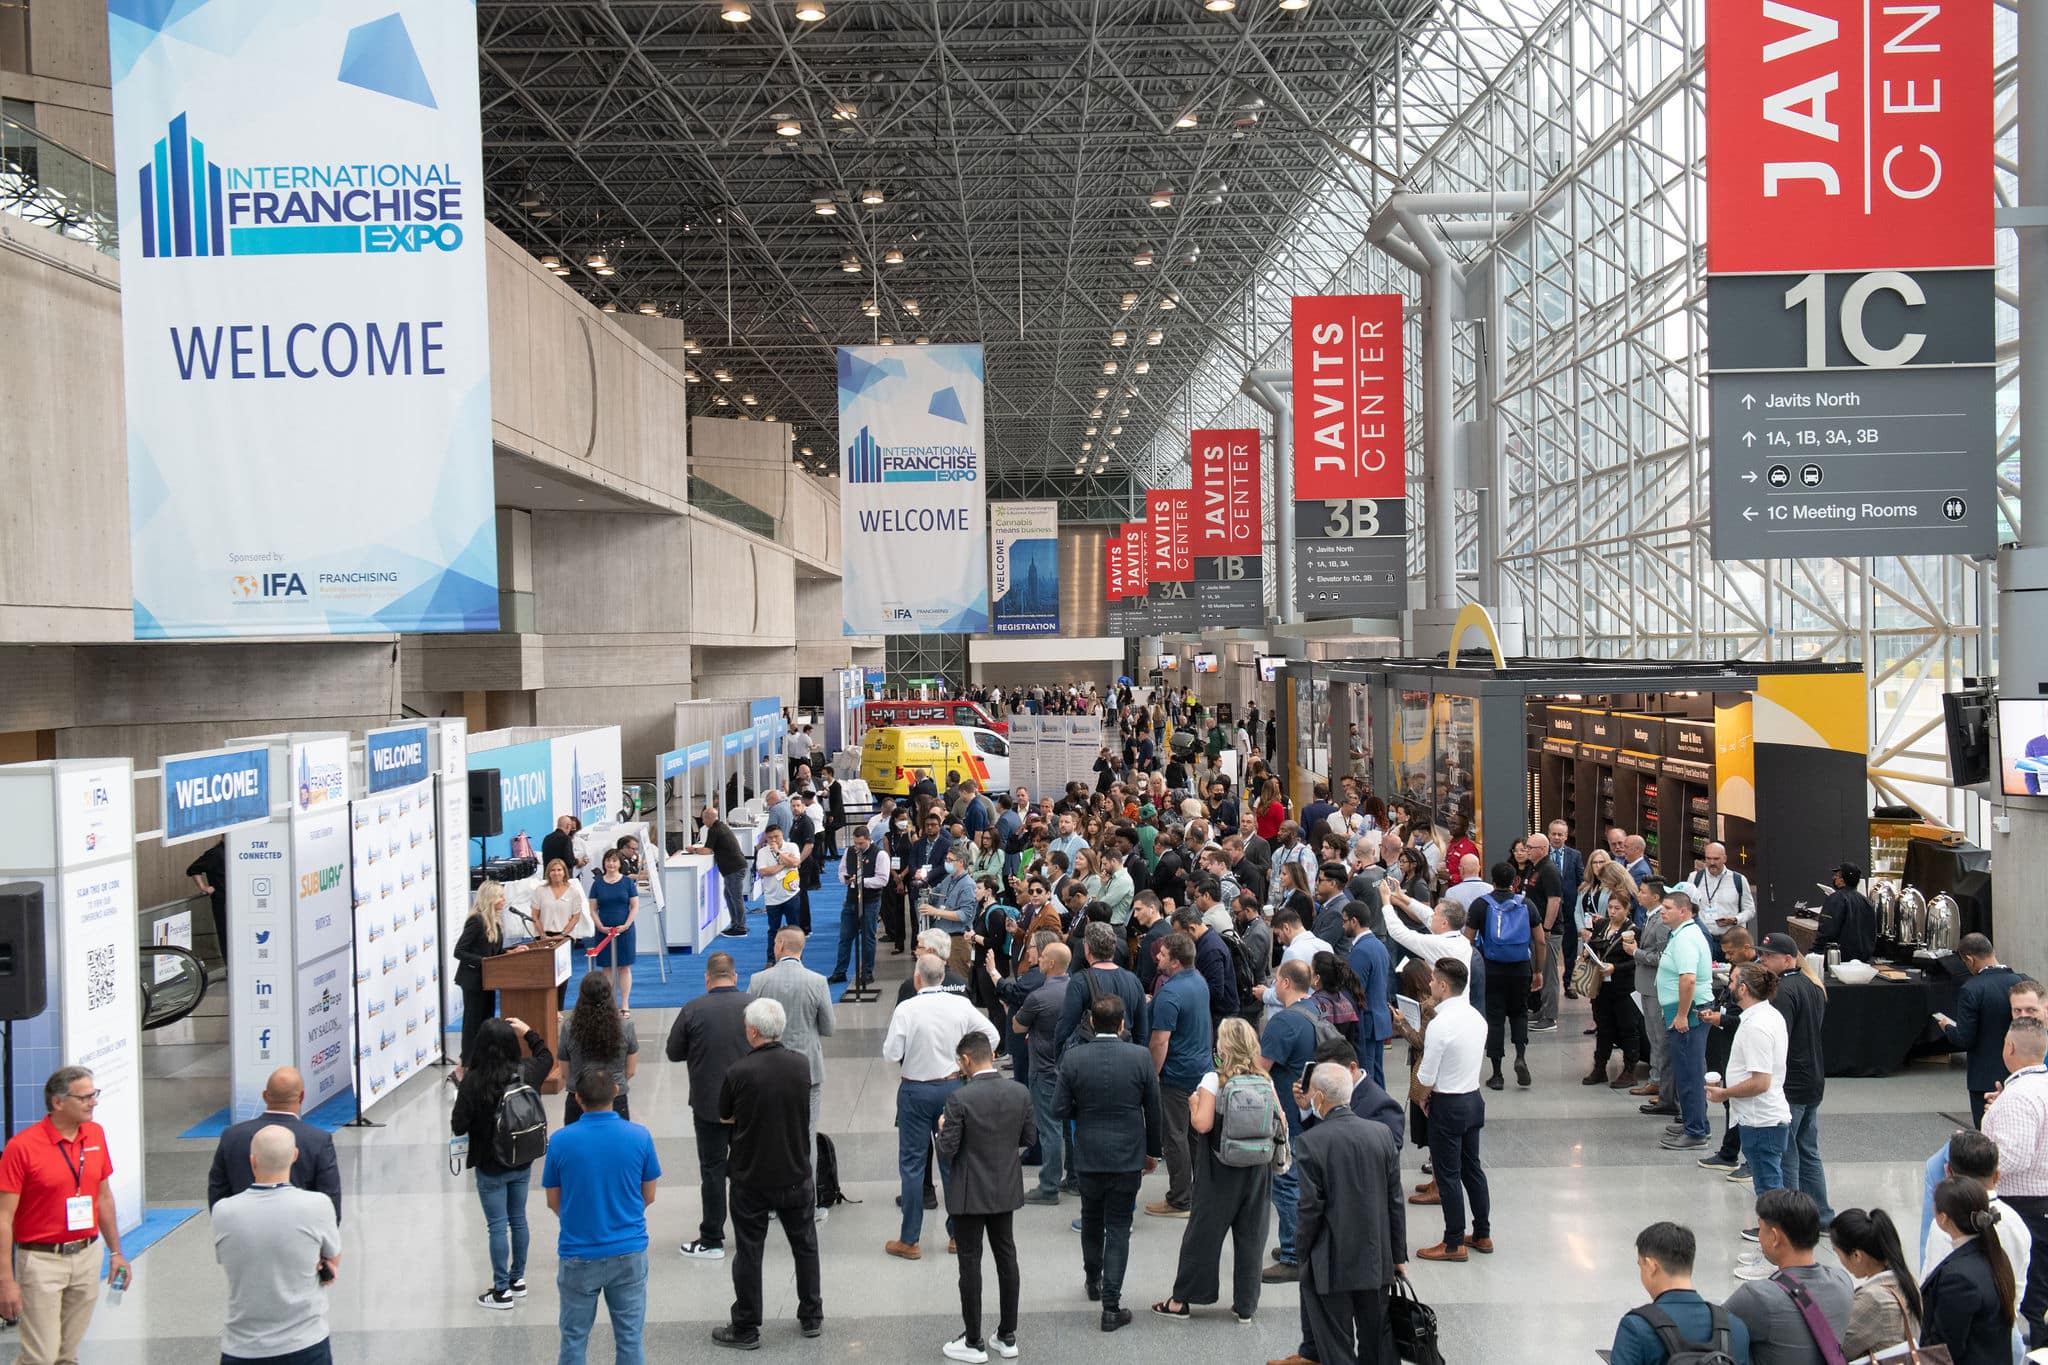 International Franchise Expo, franchise conference at the Jacob Javits Center in NYC